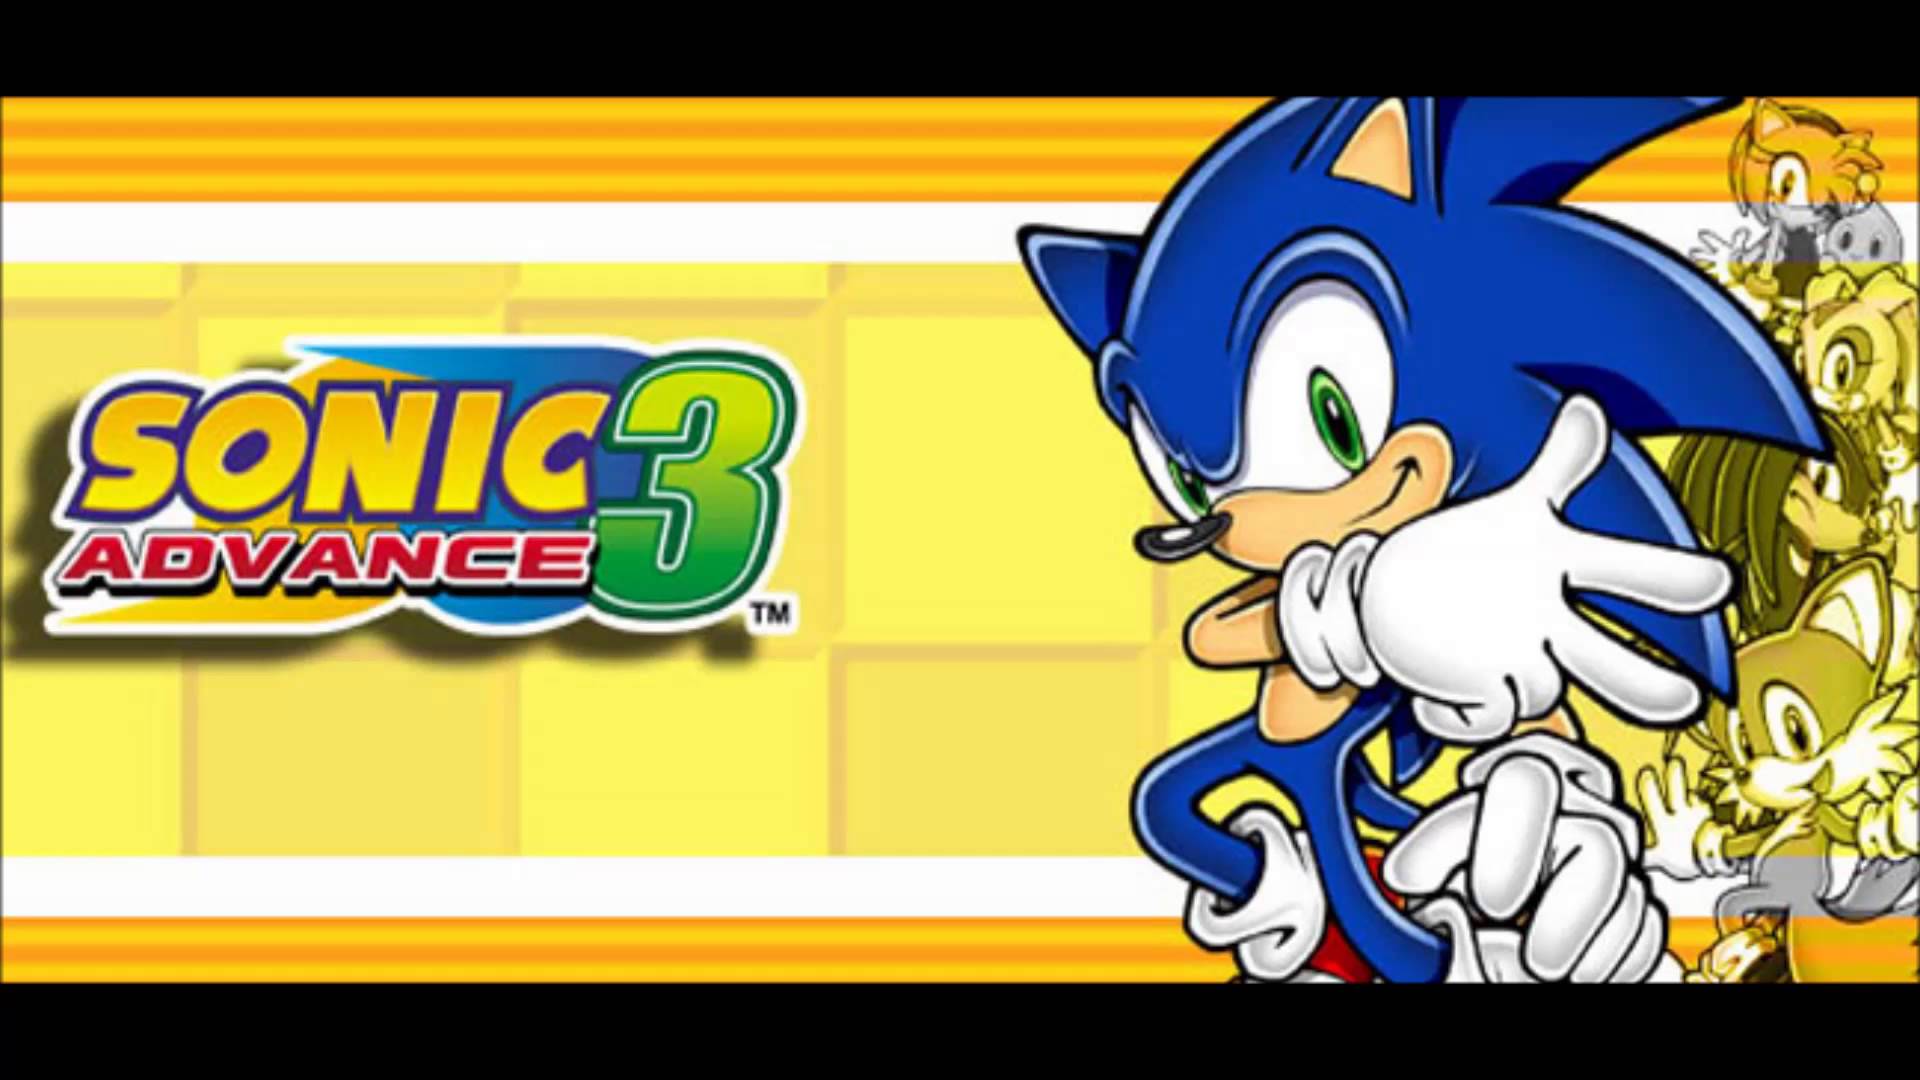 Sonic Advance 3 is coming to the Wii U virtual console in Japan